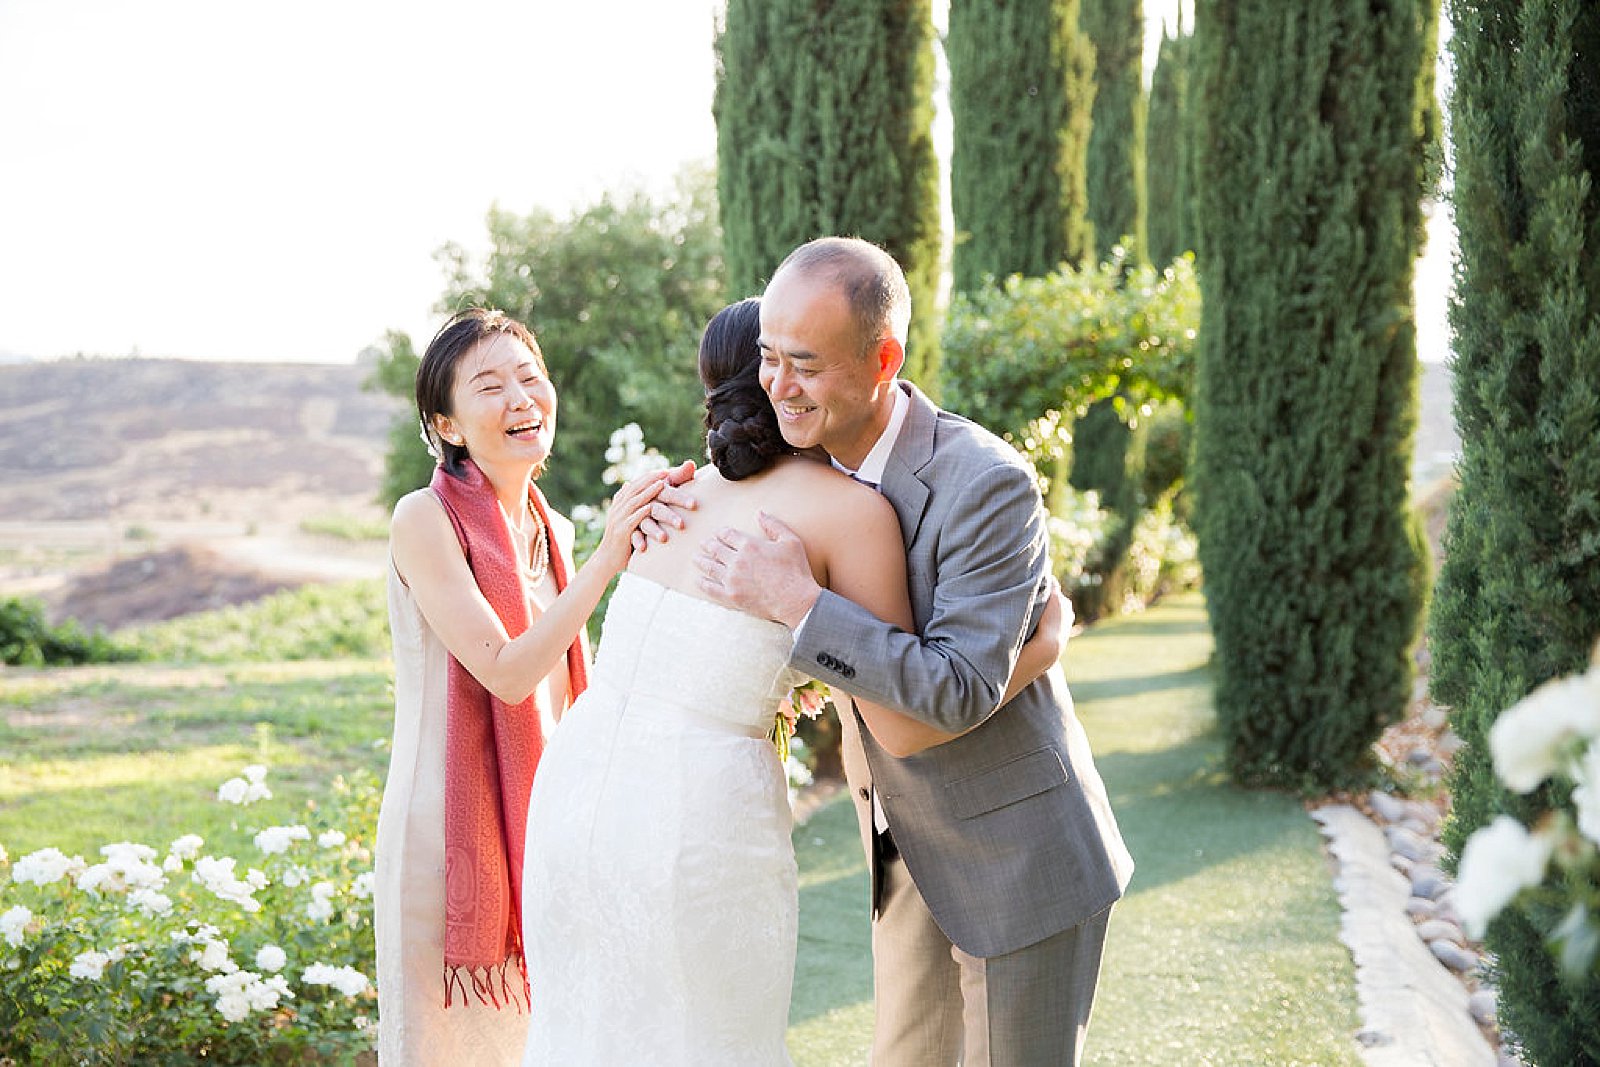 parents of bride embrace bride before Falkner Winery wedding day photographed by Randi Michelle Photography